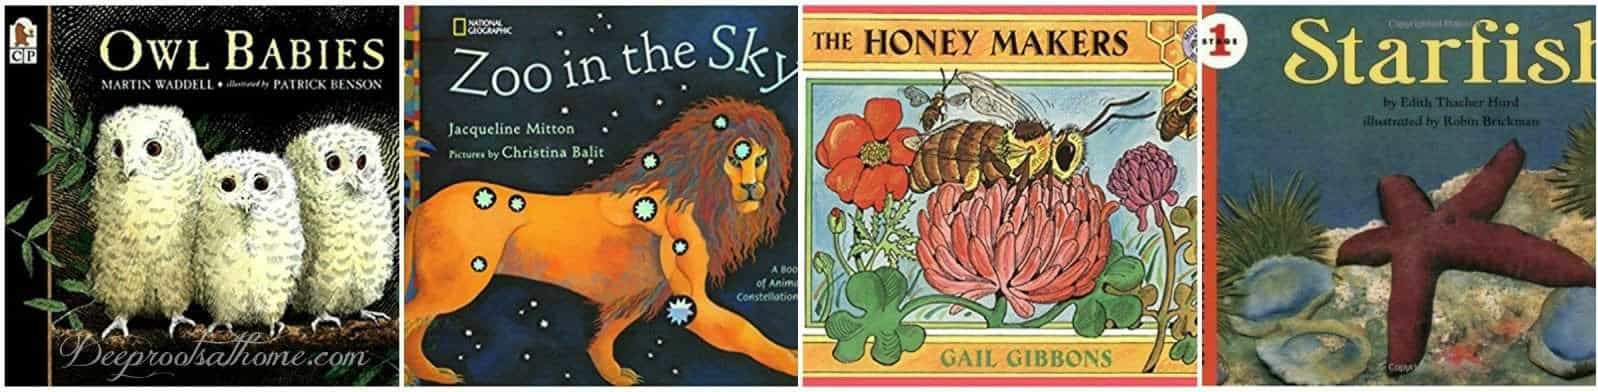 57 K - Gr. 5 True Story Nature & Science Books For Curious Kids. 4 books on the reading list.